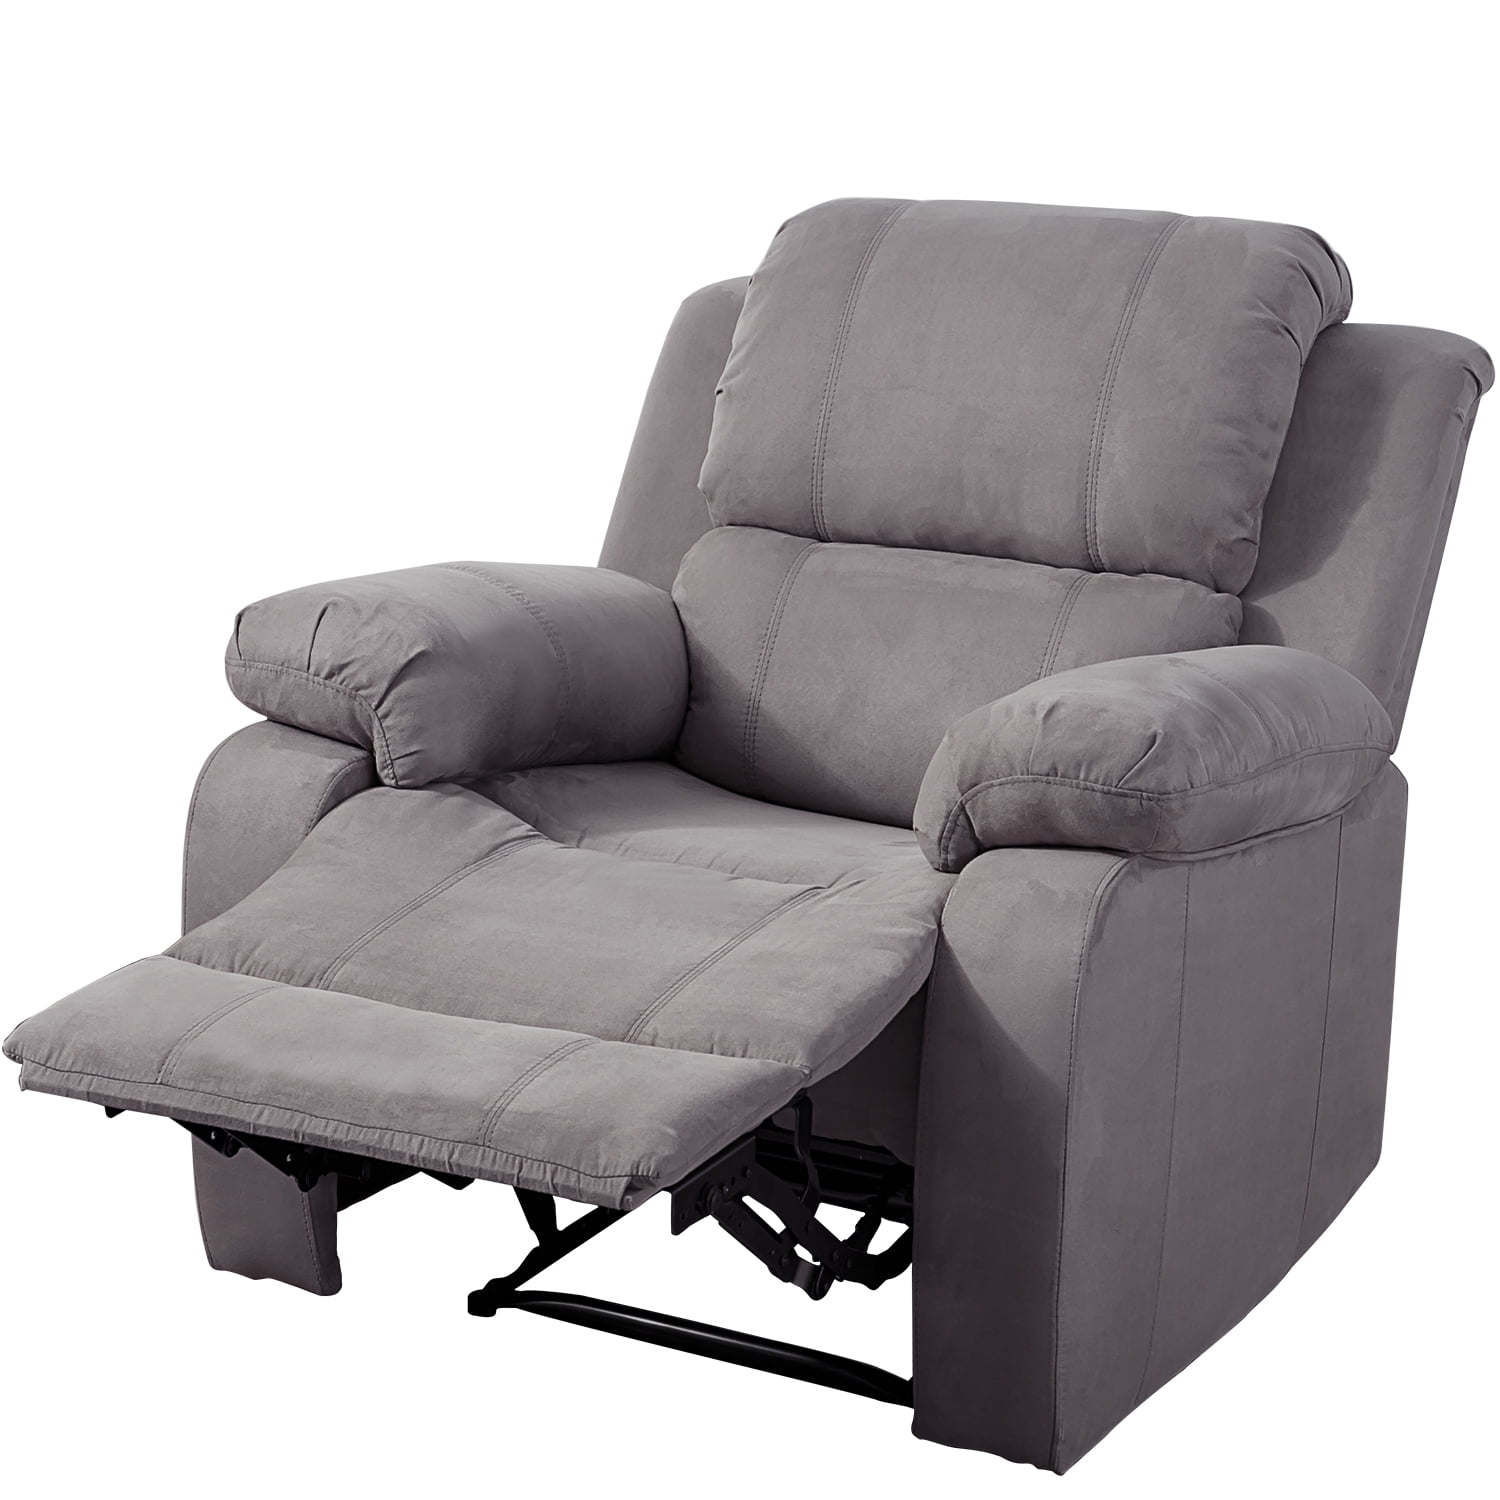 Massage Recliner Chair with 8 Vibration Motors and Remote Control